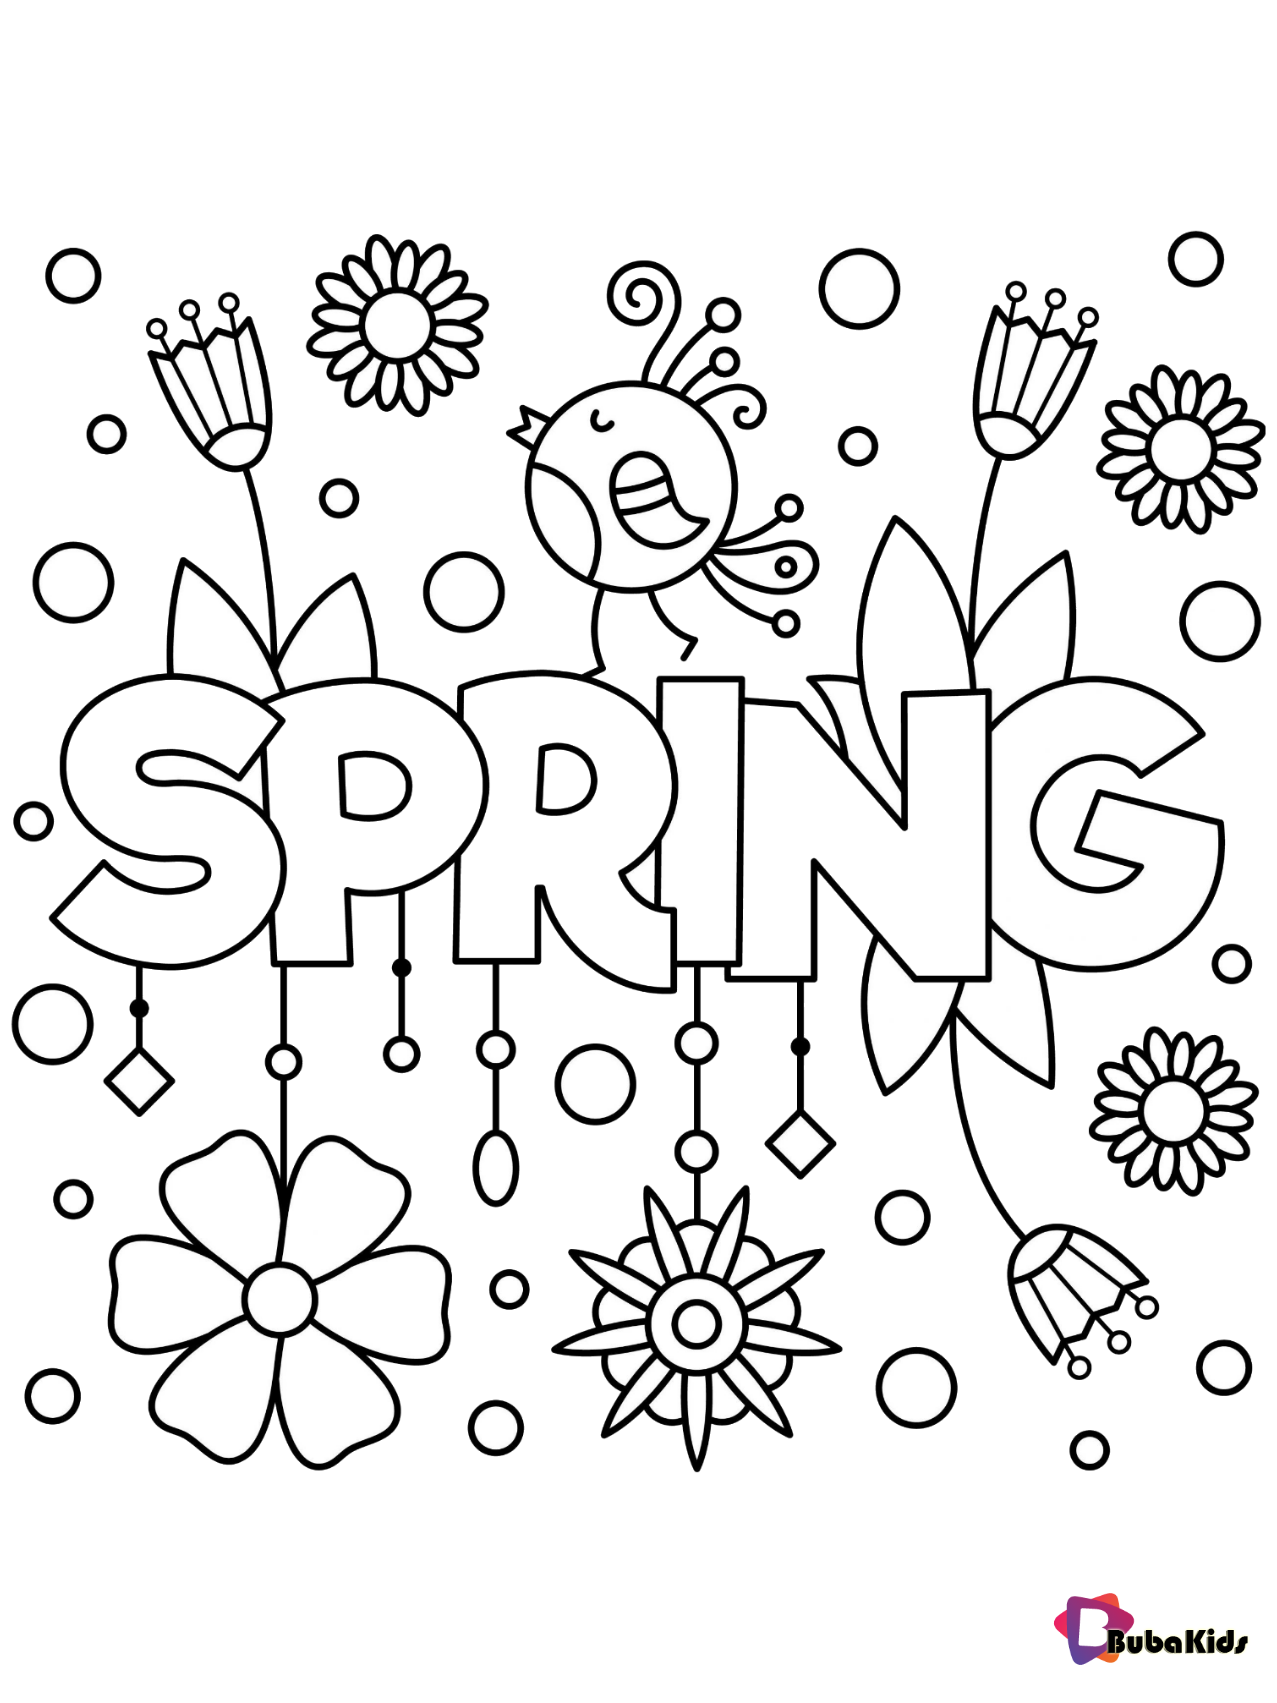 Spring time coloring page for kids